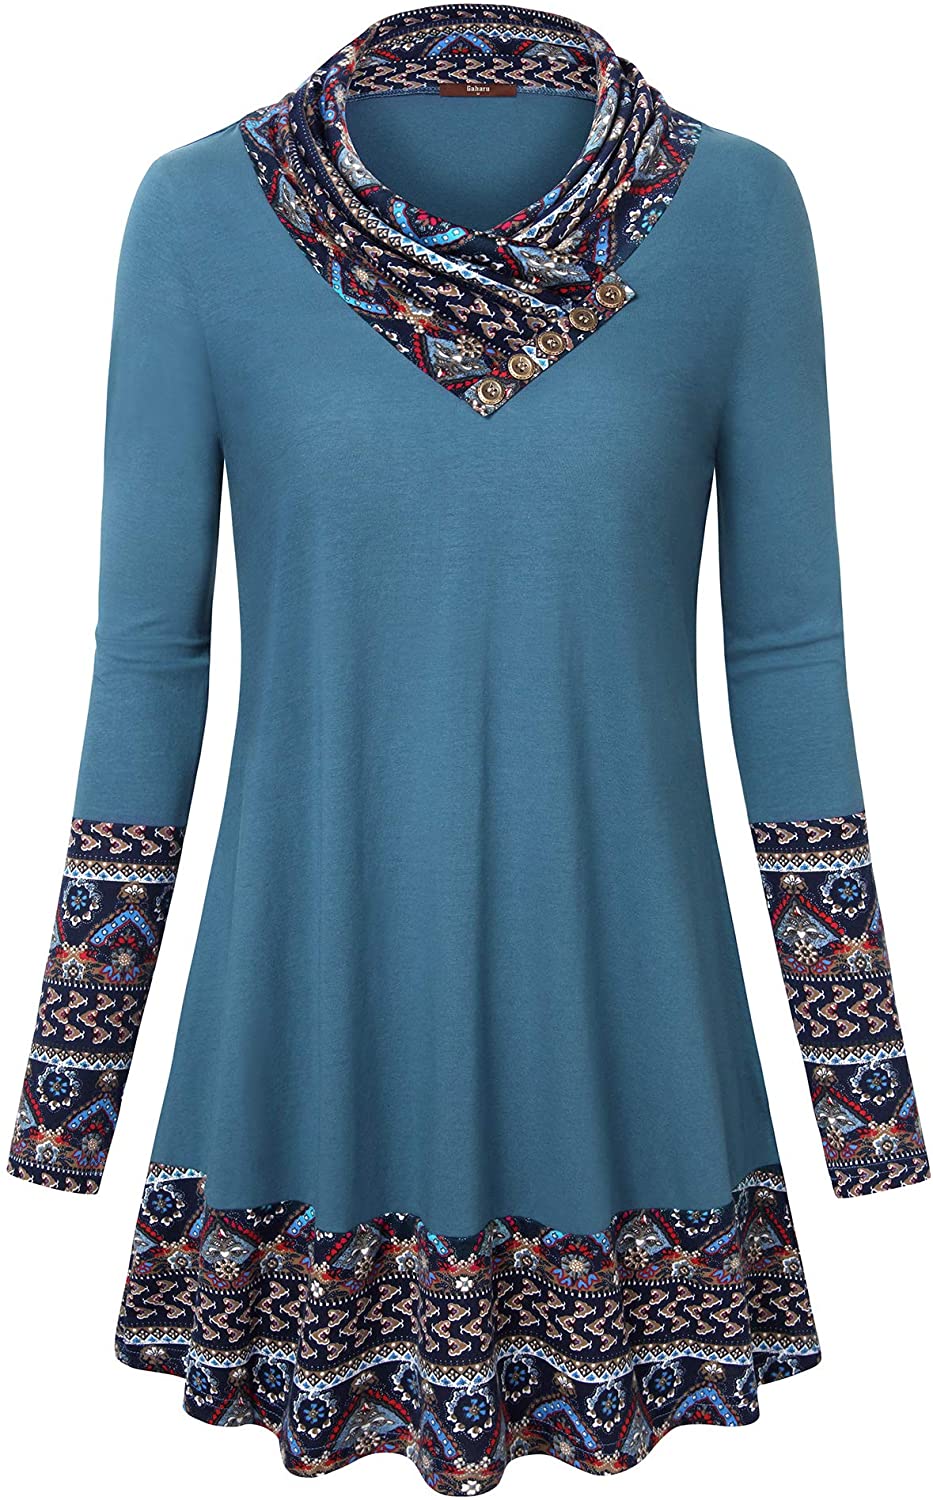 Gaharu Womens Long Sleeve Button Cowl Neck Floral Printed Casual Tunic Tops 